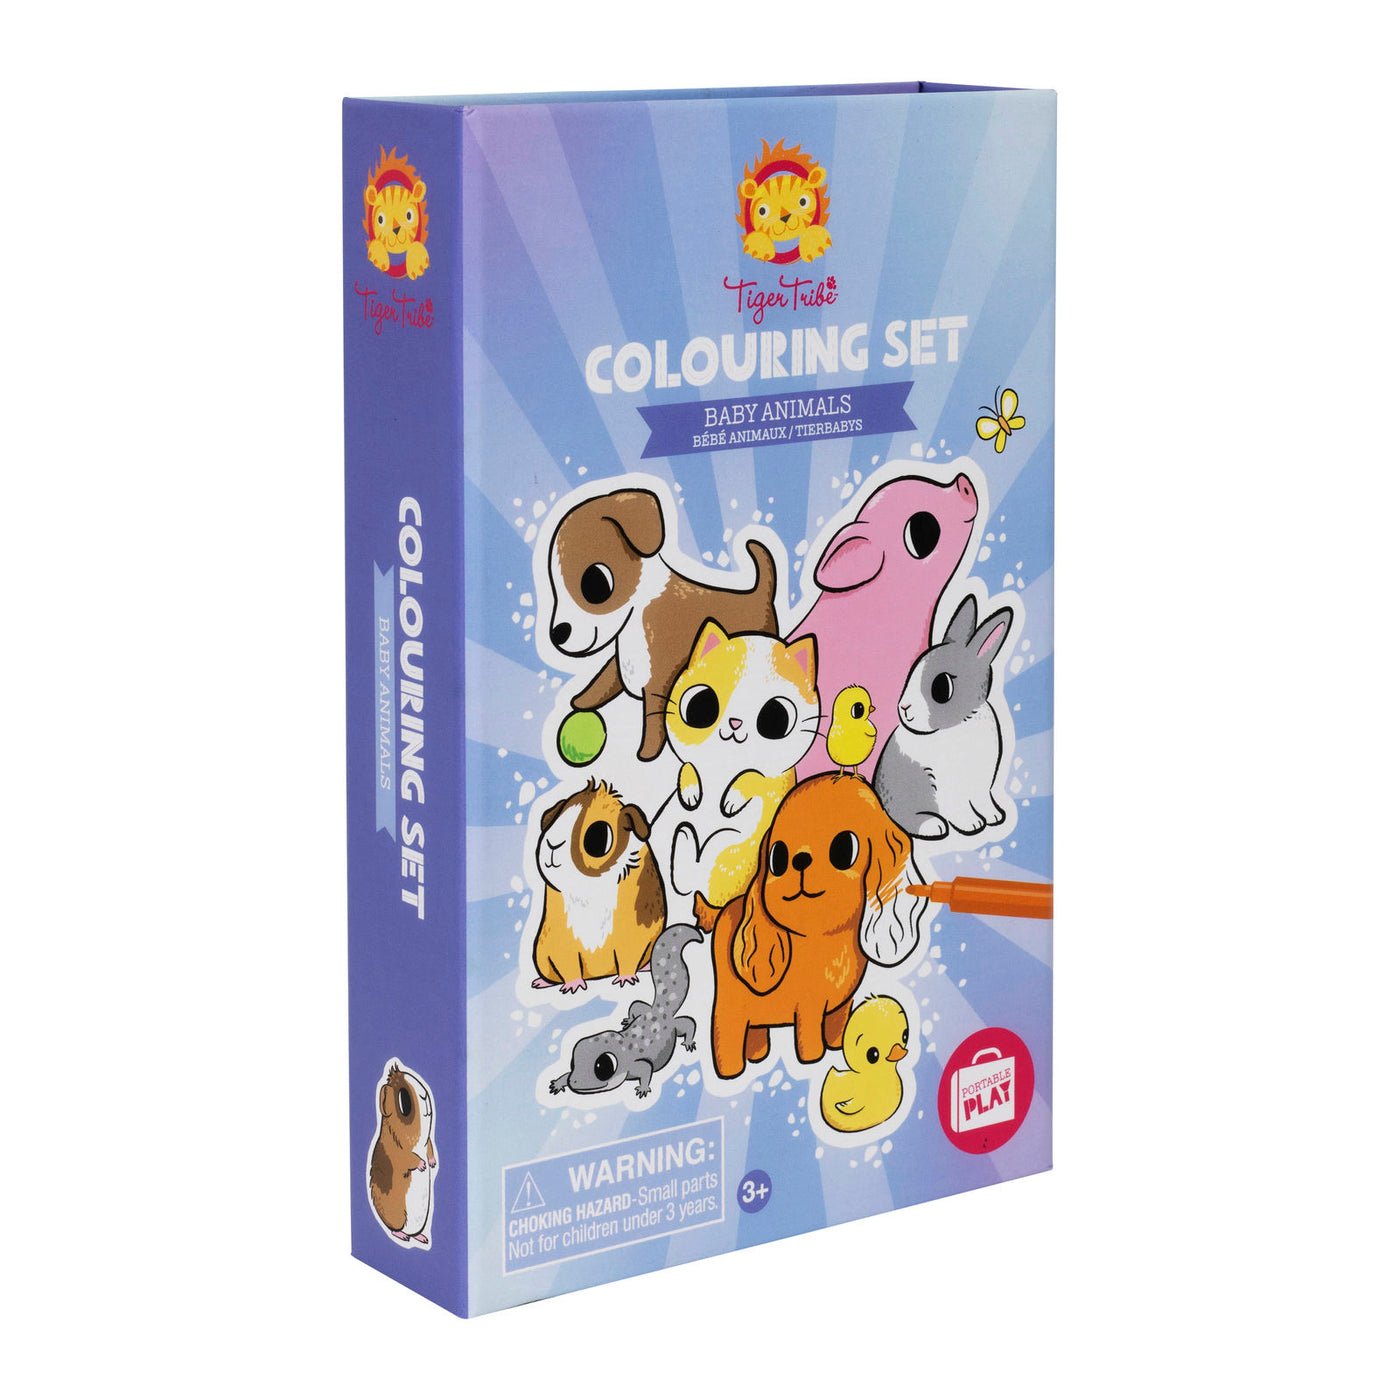 Tiger Tribe - Coloring Set Baby Animals Side of box